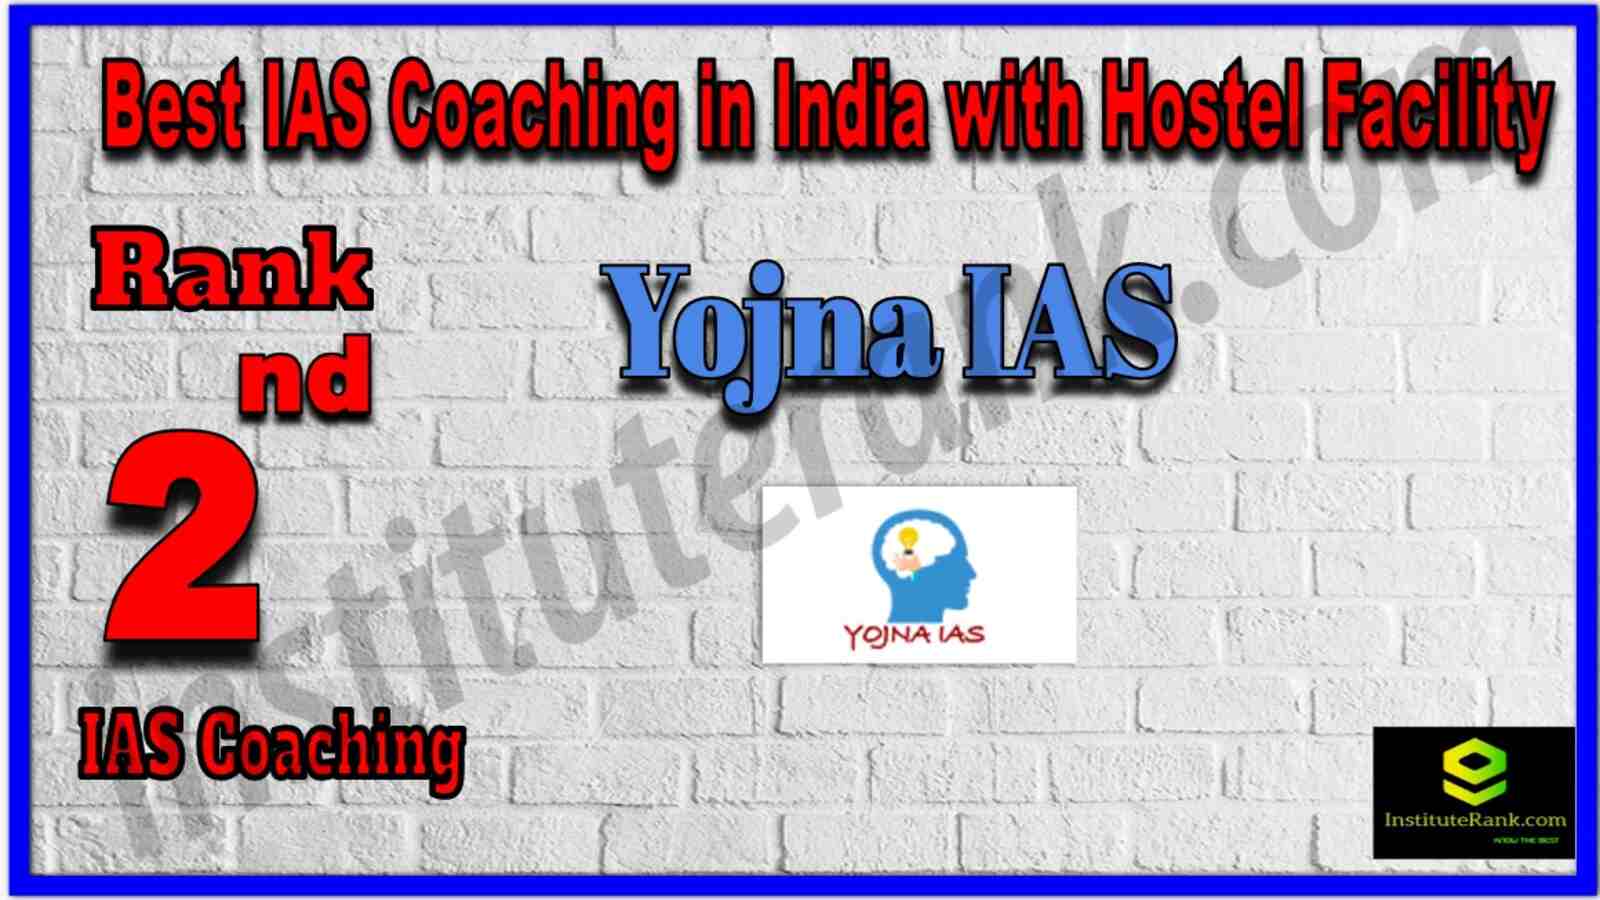 Rank 2 Best IAS Coaching in India With Hostel Facility